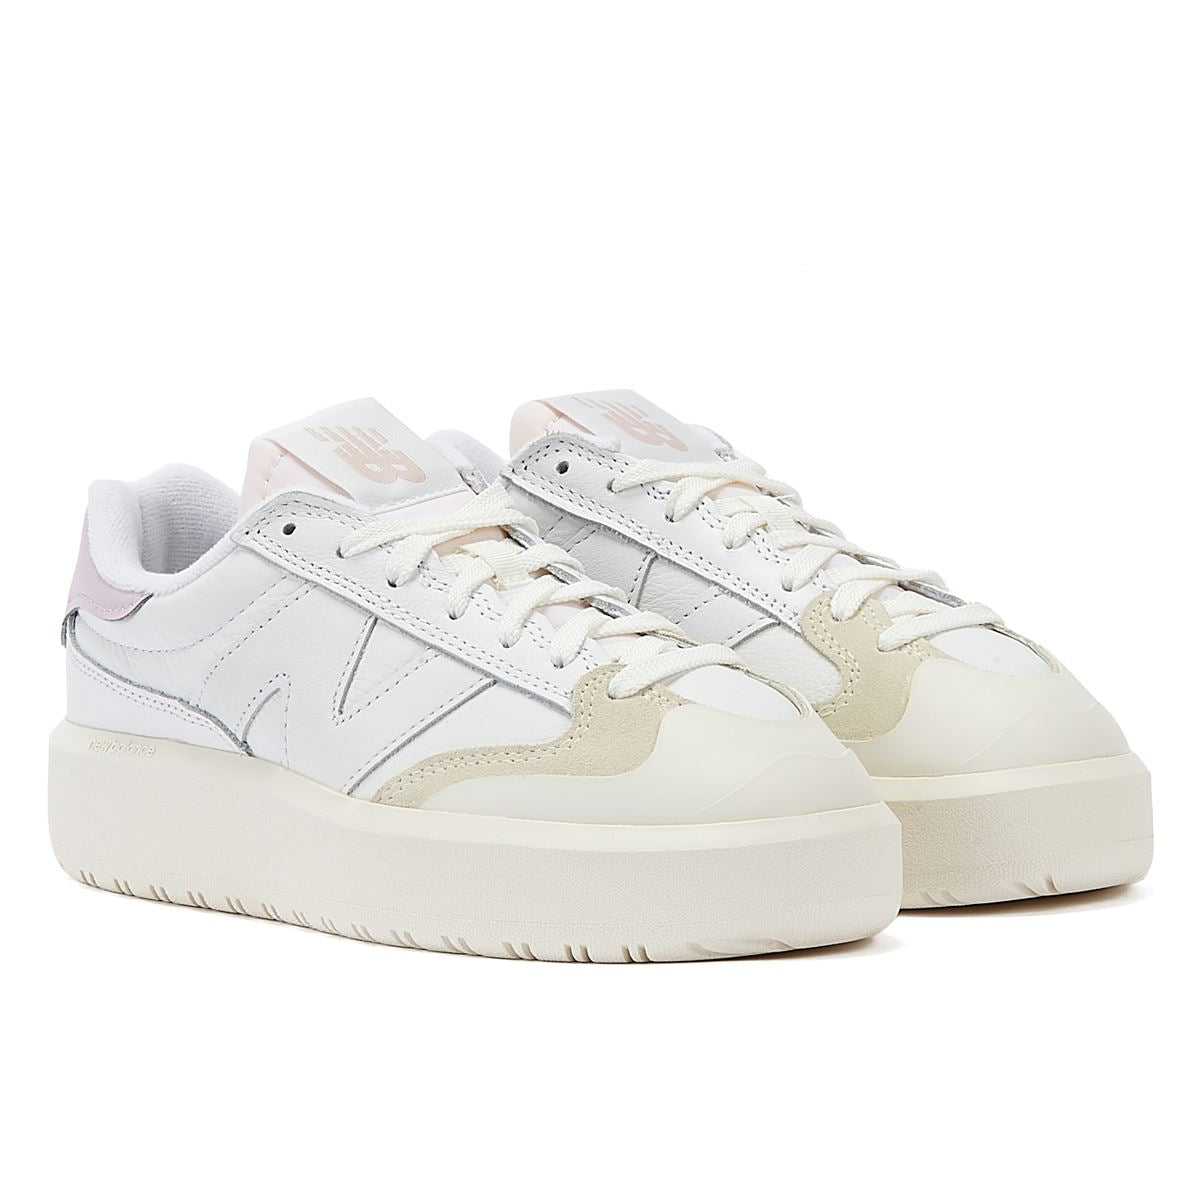 New Balance 302 Baskets Femme Blanches/Roses